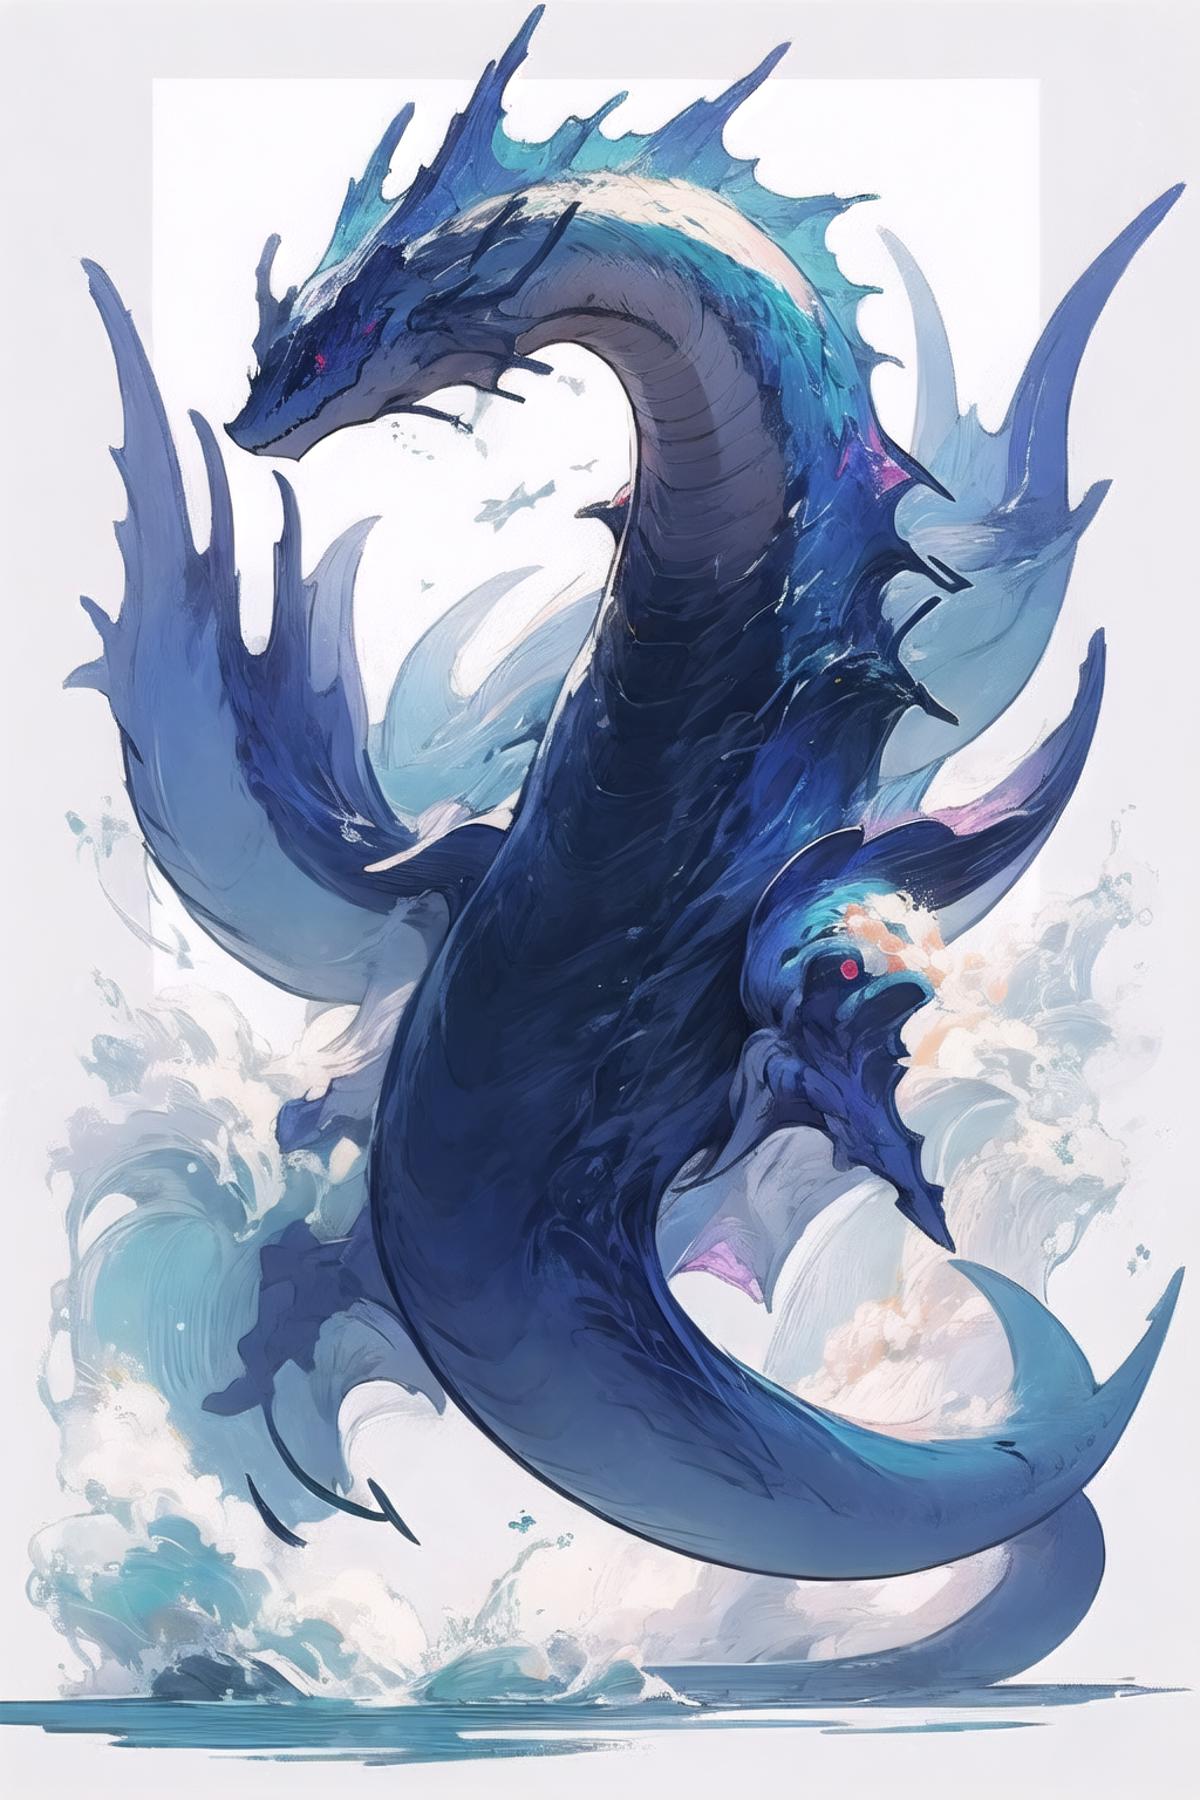 [LoRA] Sea dragon / 海竜 Concept (With dropout & noise version) image by L_A_X